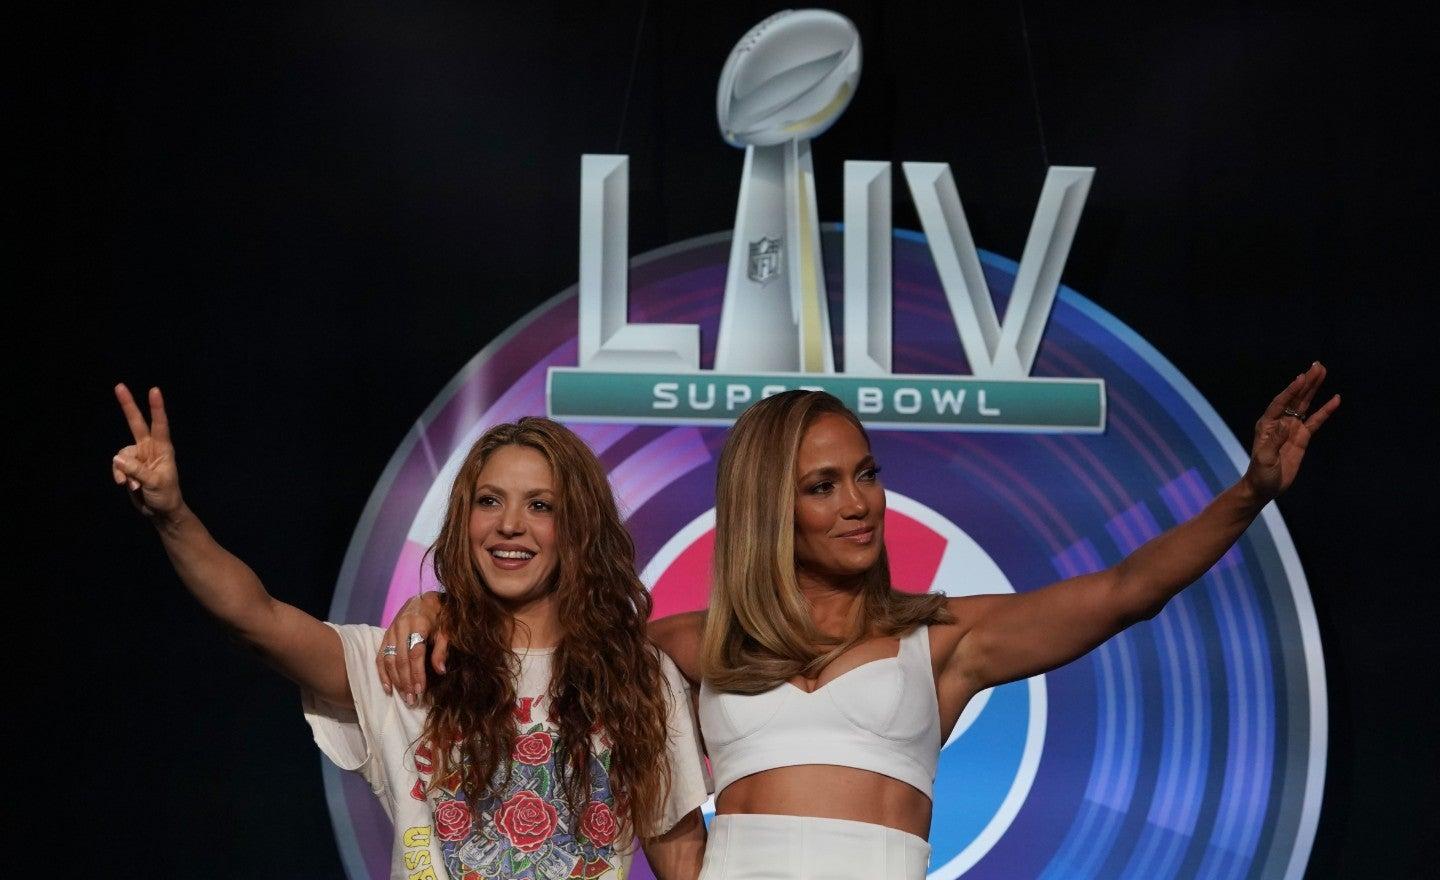 J Lo And Shakira's Super Bowl Halftime Performance Seen As